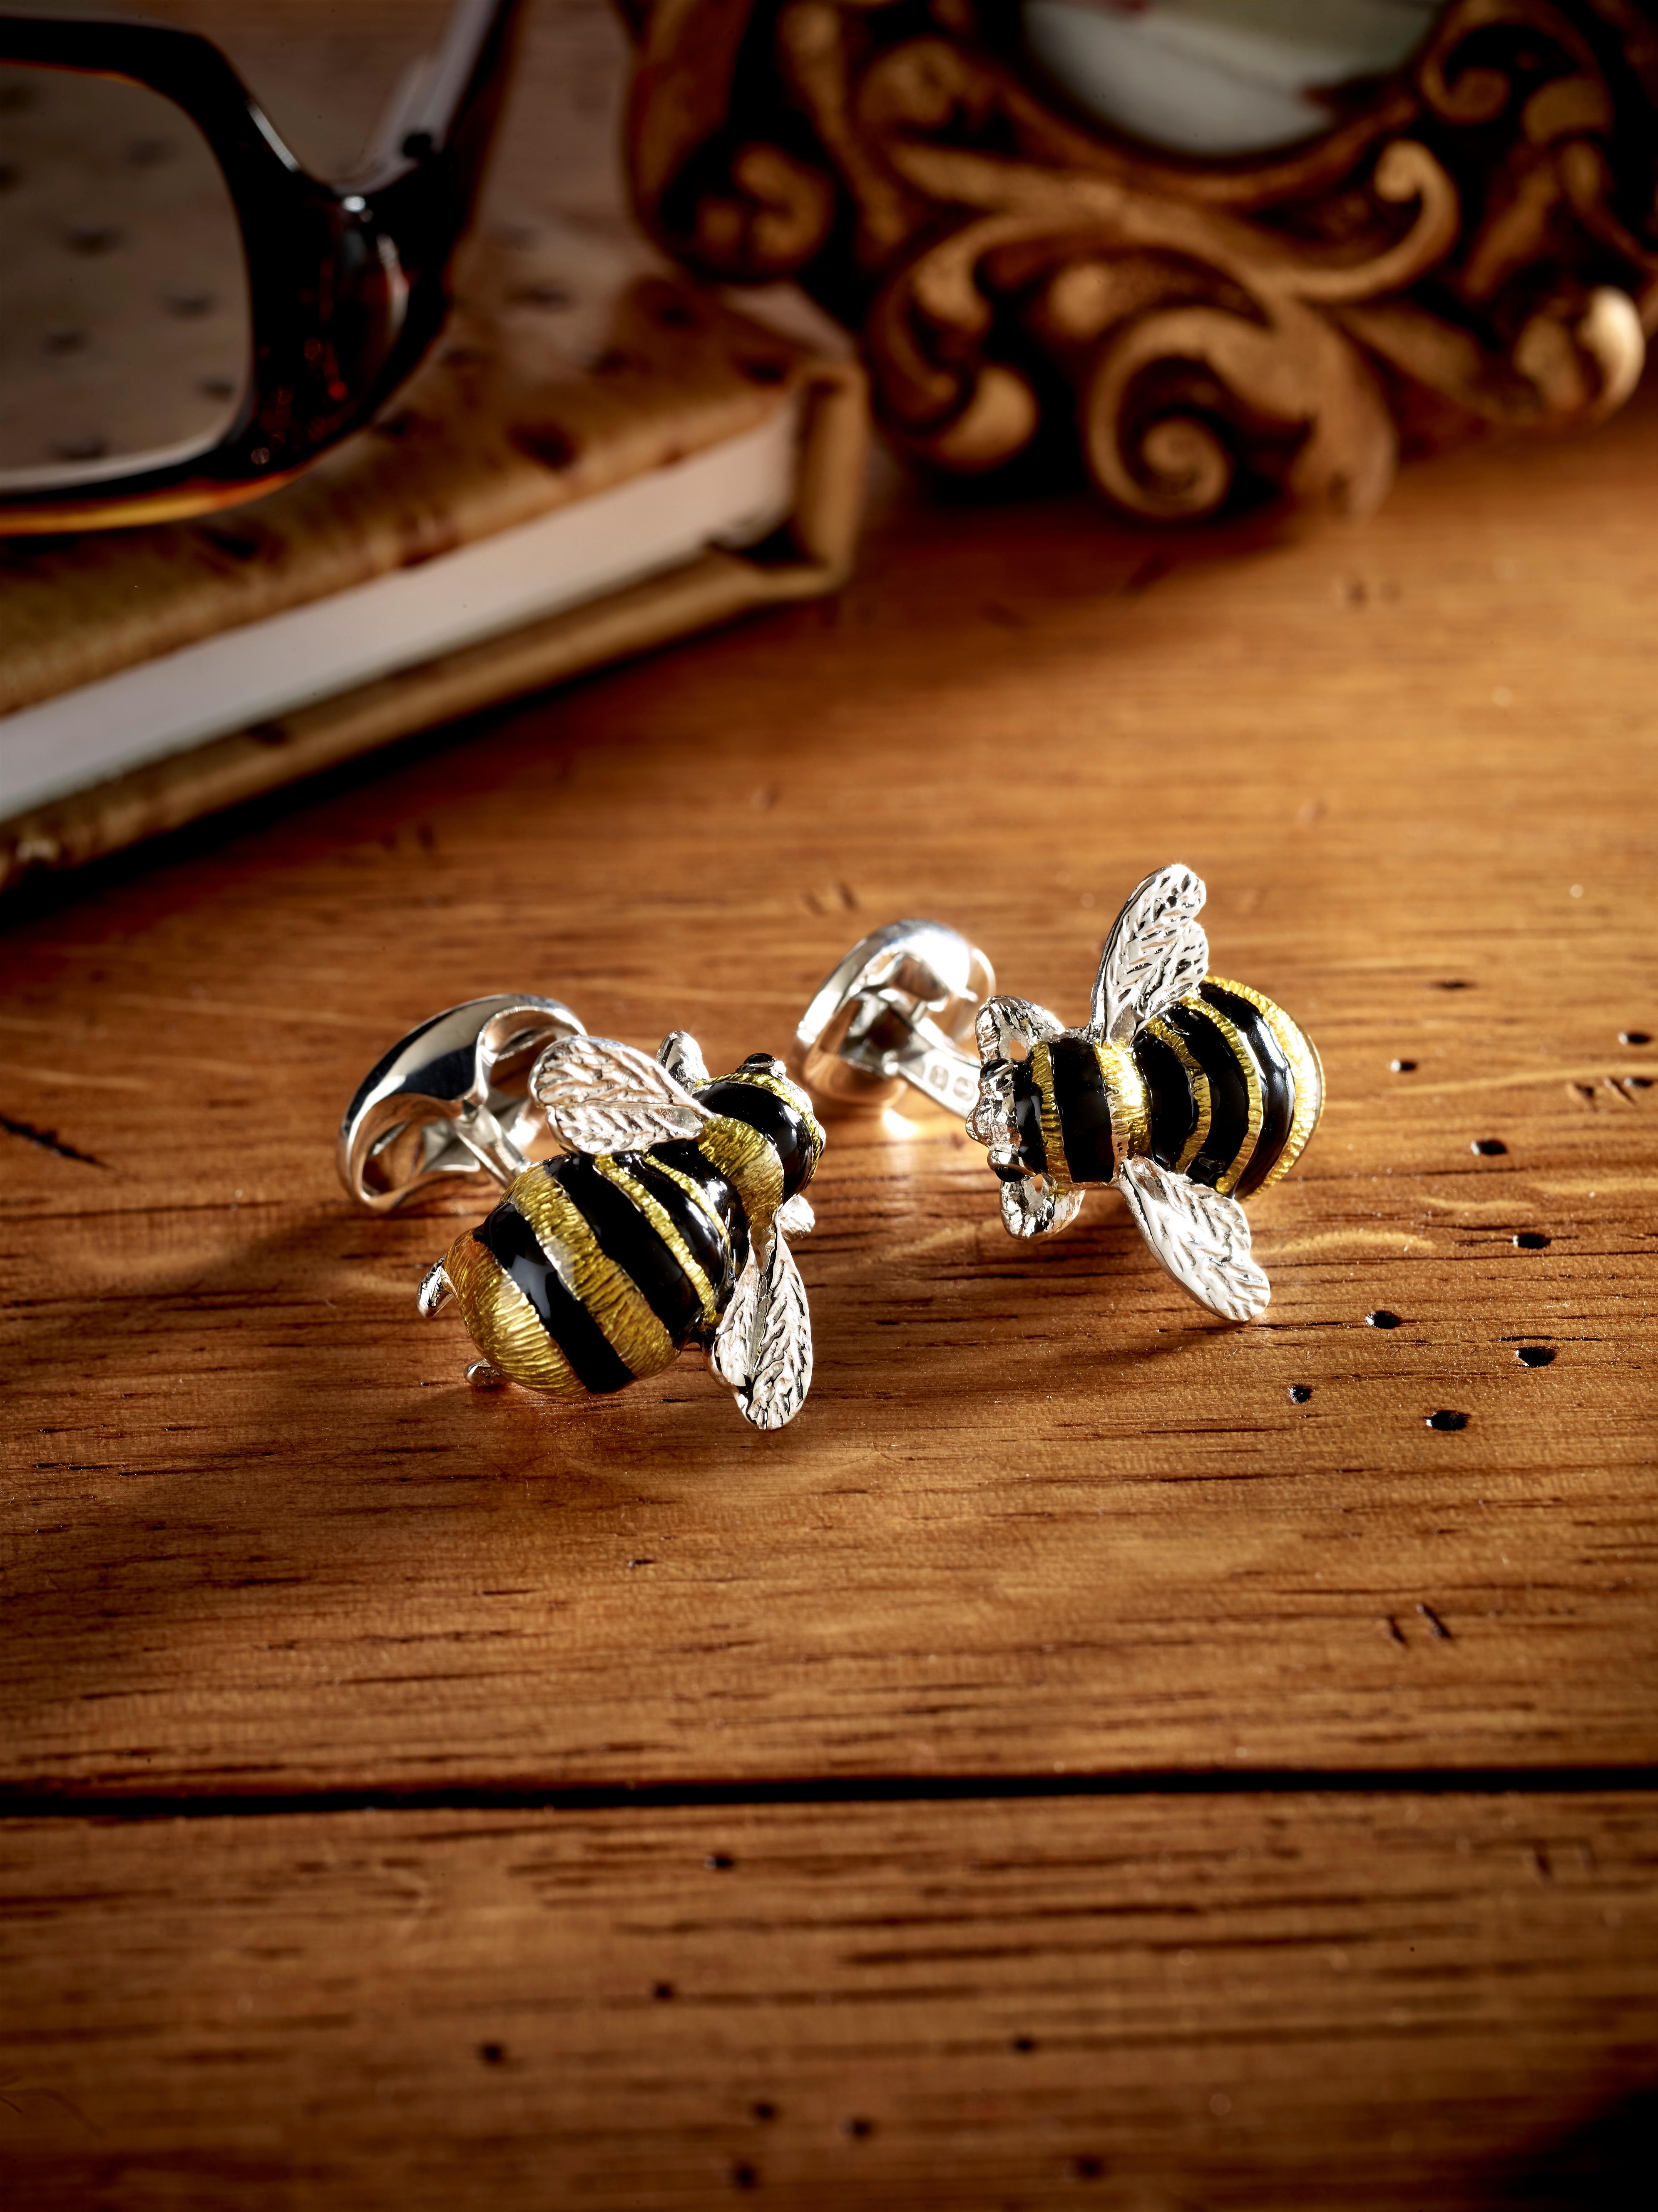 DEAKIN & FRANCIS, Piccadilly Arcade, London.

A familiar feature of the English countryside garden, the bumble bee’s bright colours were the inspiration behind this fantastic set of cufflinks.
The vibrant black and yellow enamel detail combined with